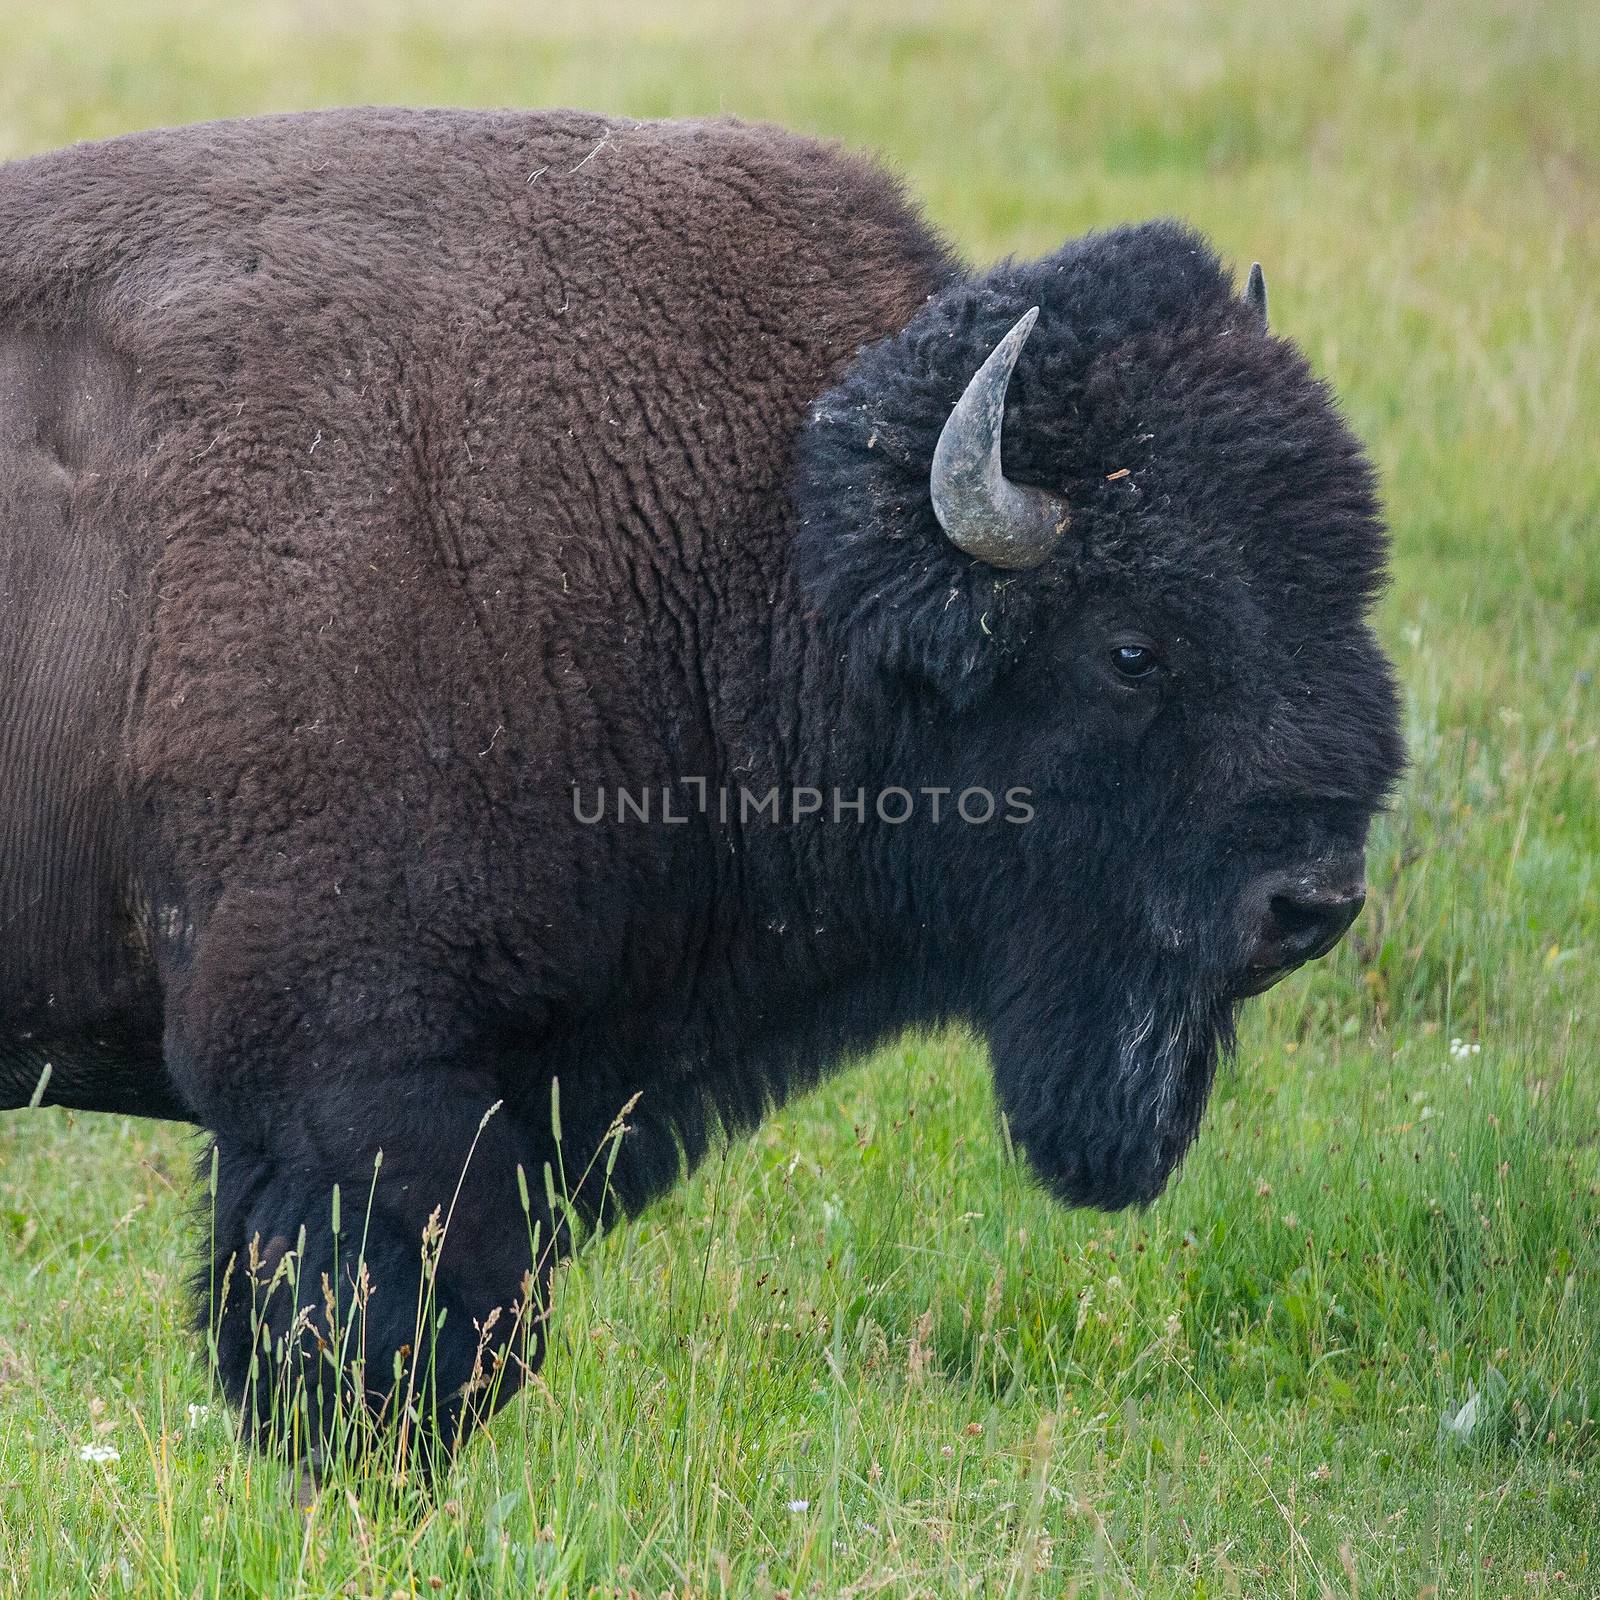 The typical American Bison in the Yellowstone National Park in USA